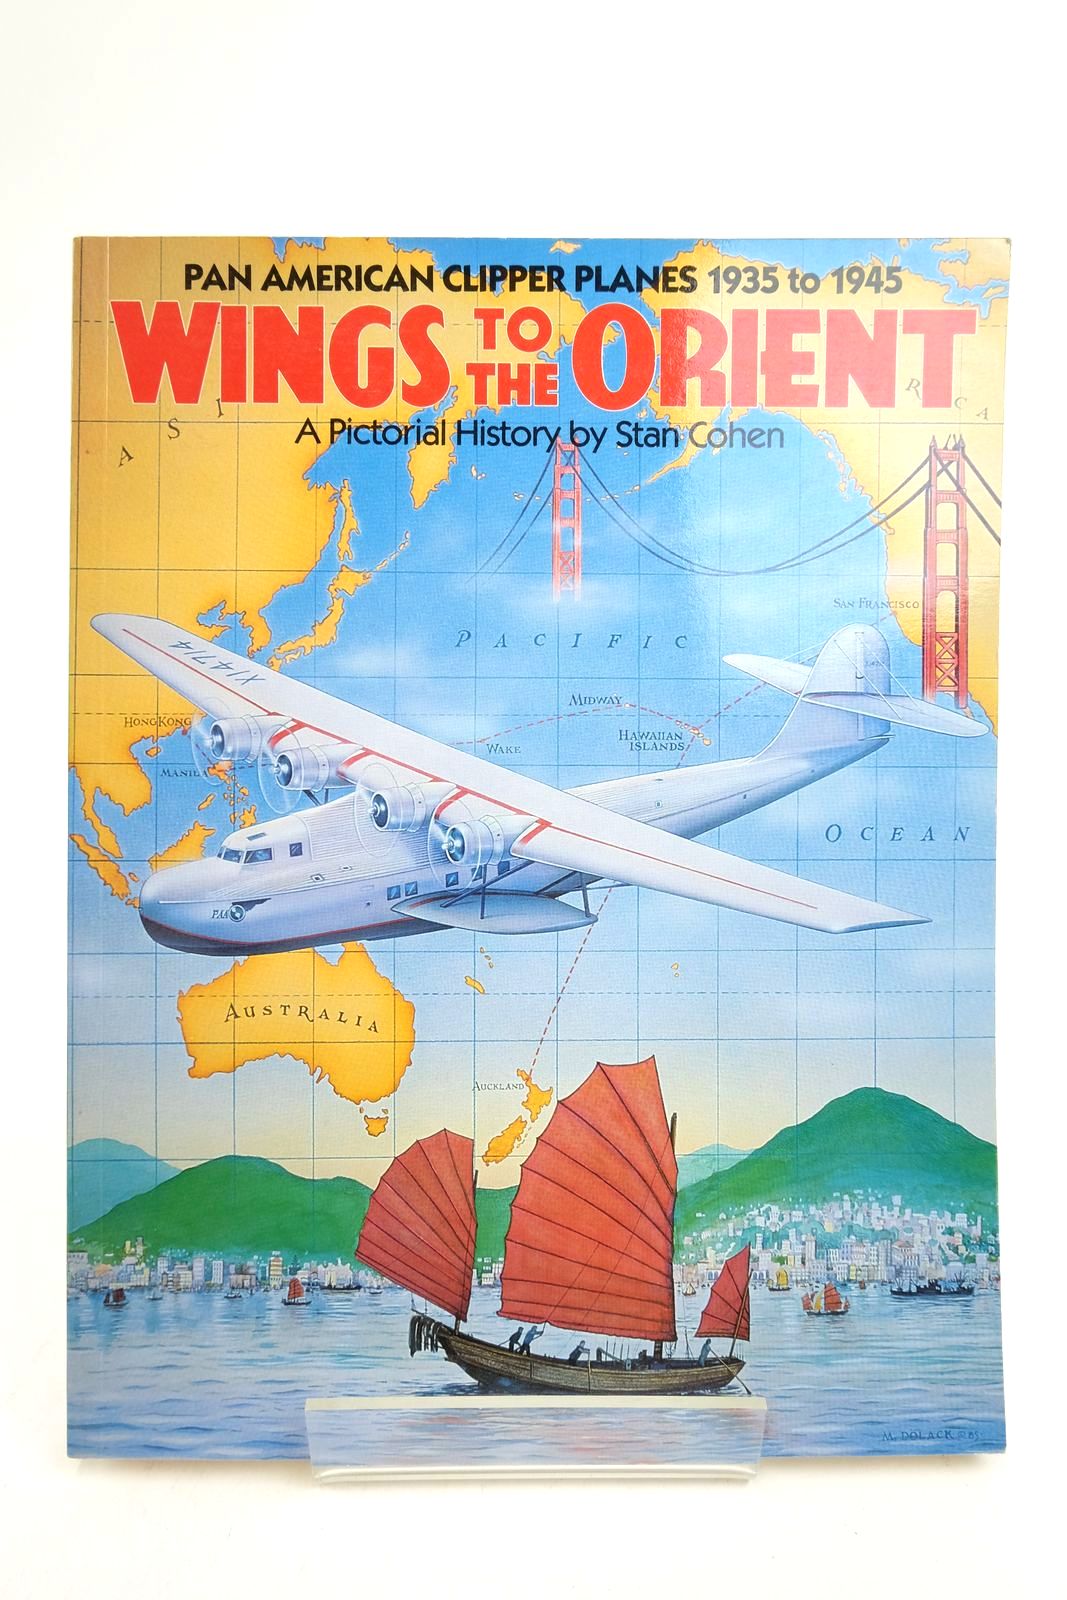 Photo of PAN AMERICAN CLIPPER PLANES 1935 TO 1945 WINGS TO THE ORIENT A PICTORIAL HISTORY- Stock Number: 2139399